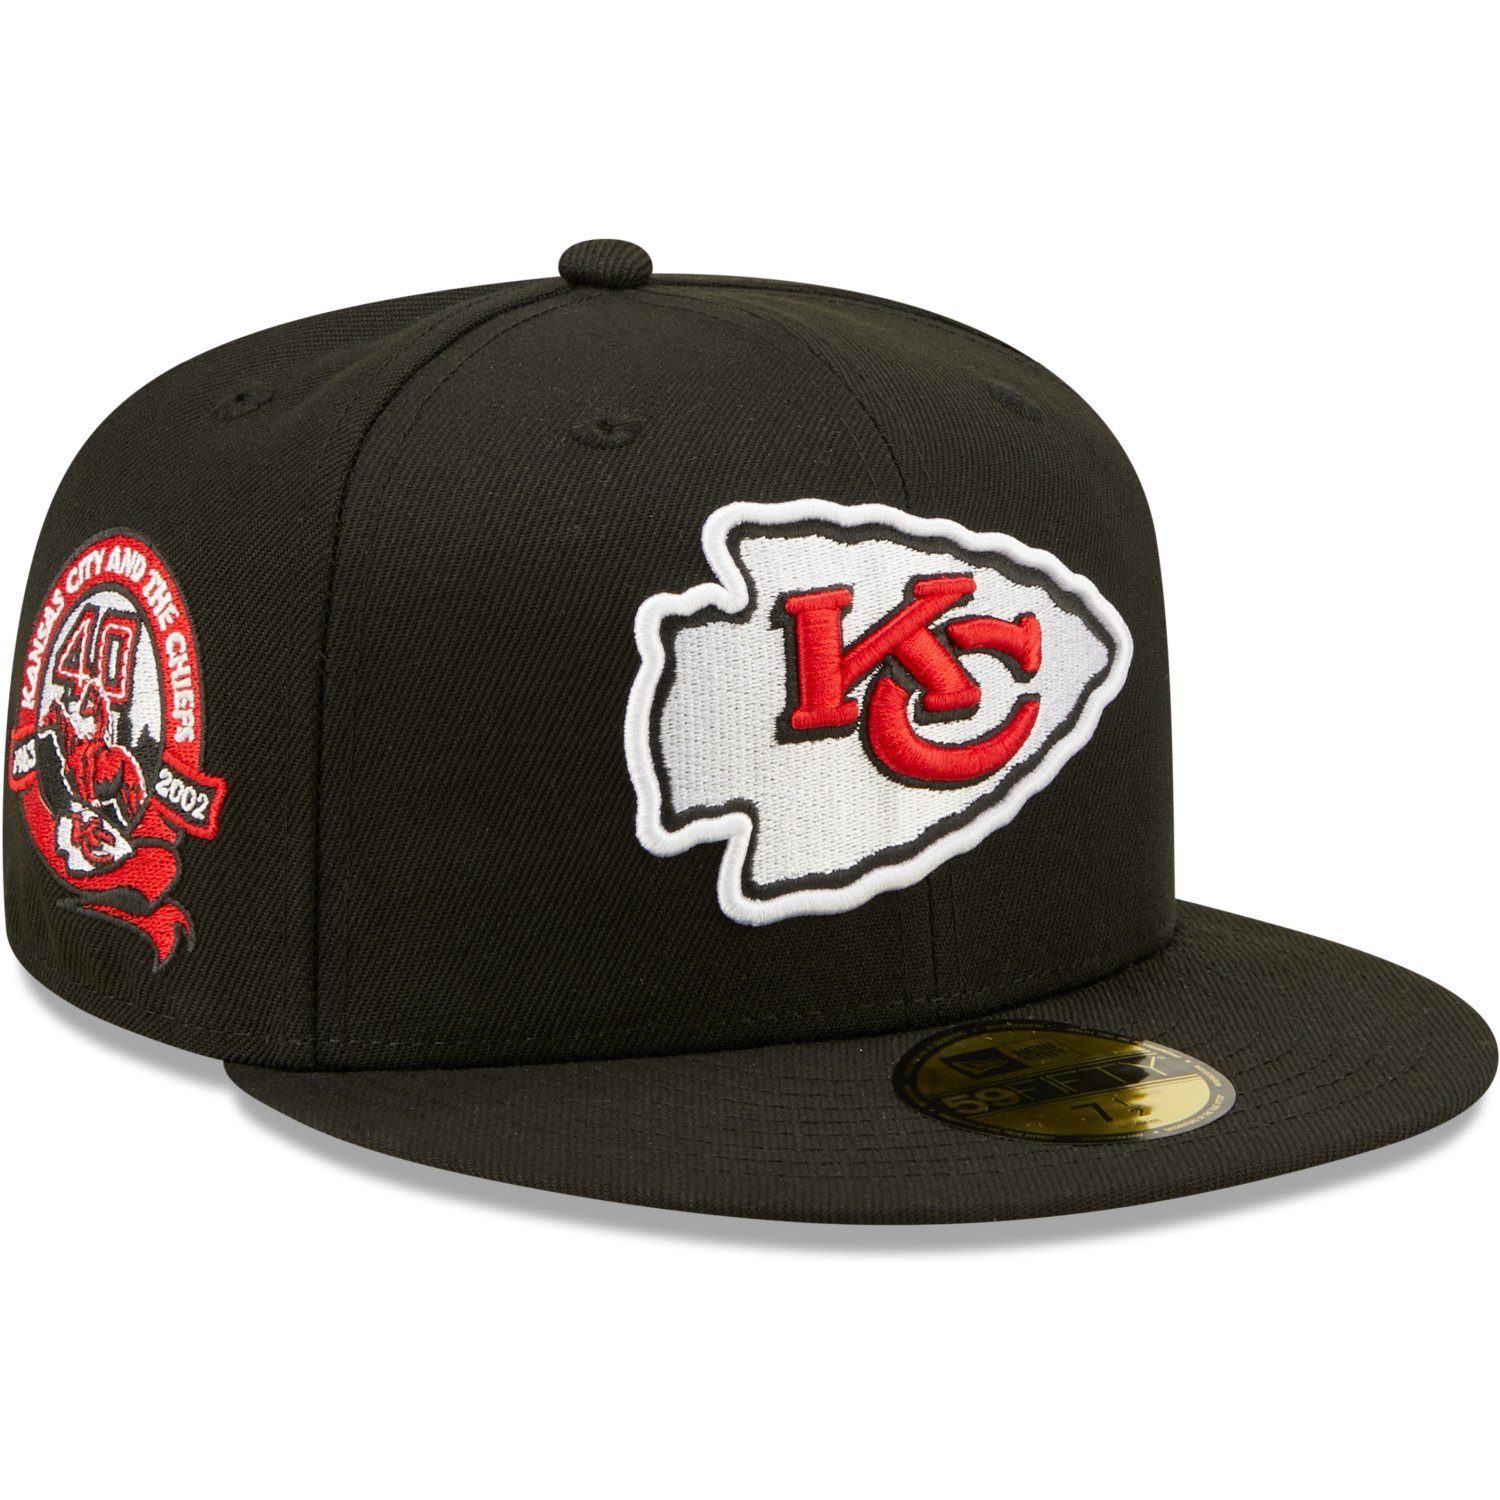 New Era Fitted Cap 59Fifty Kansas City Chiefs 40years | Fitted Caps